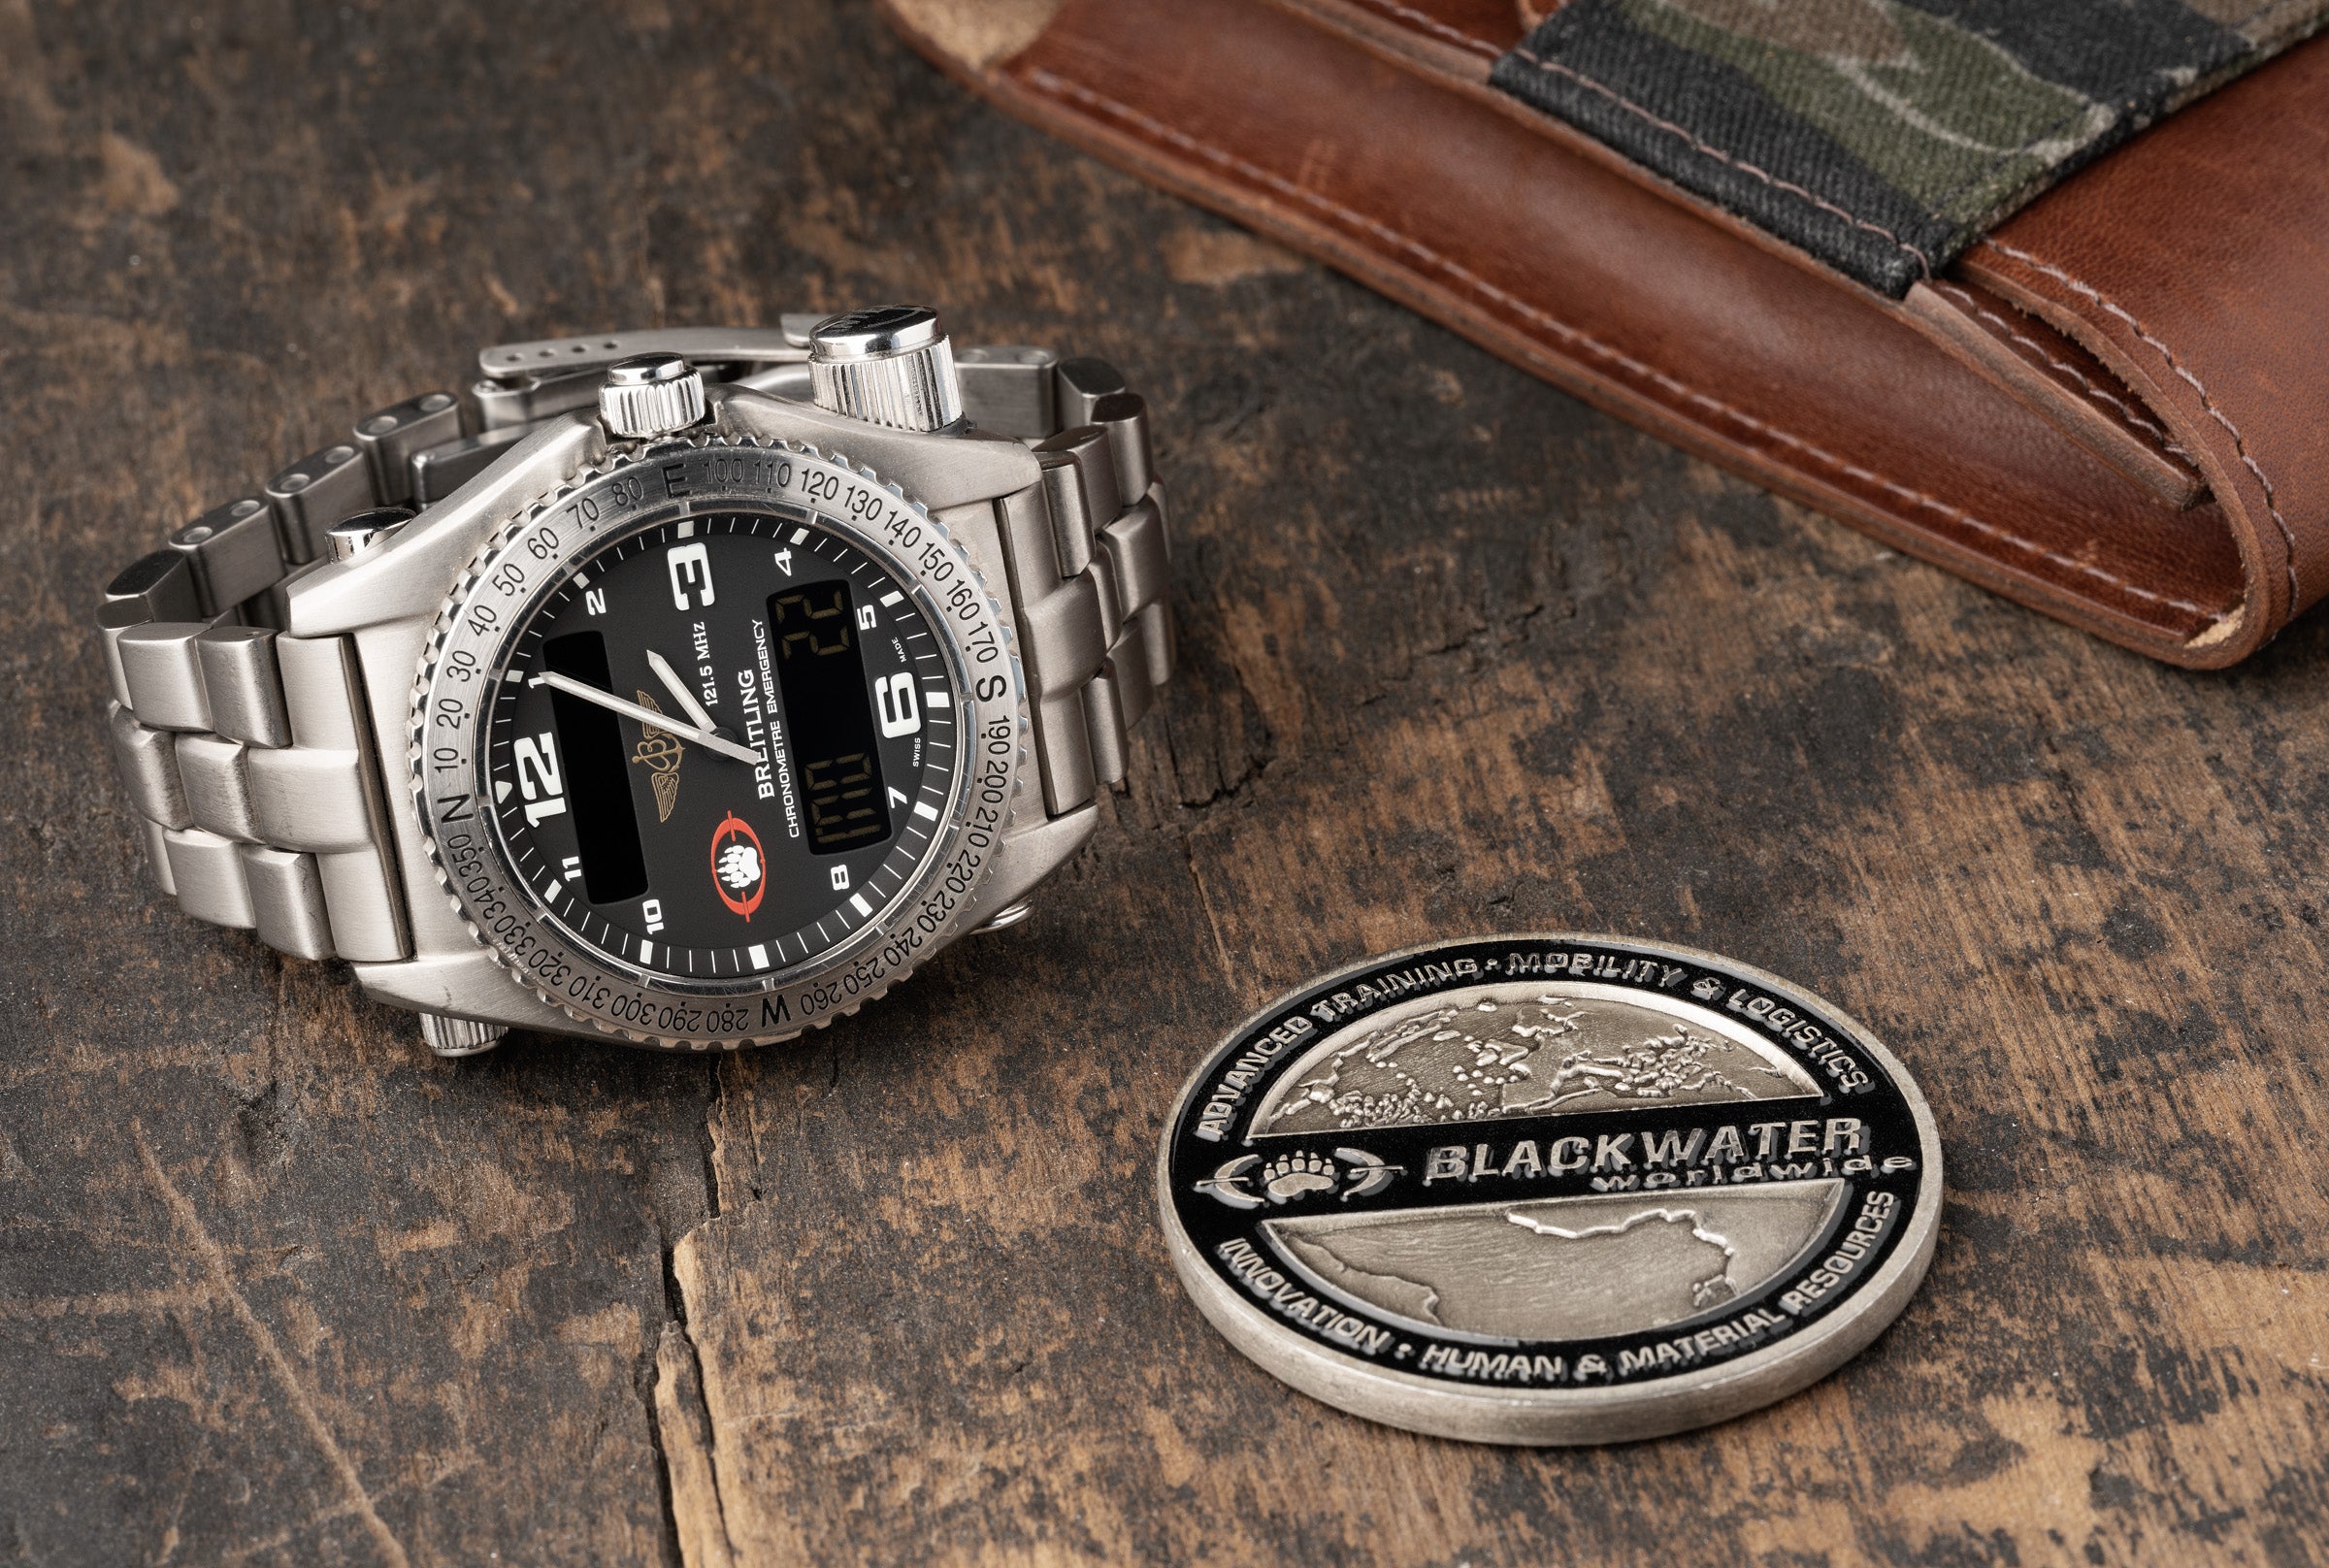 Blackwater Breitling - The Story